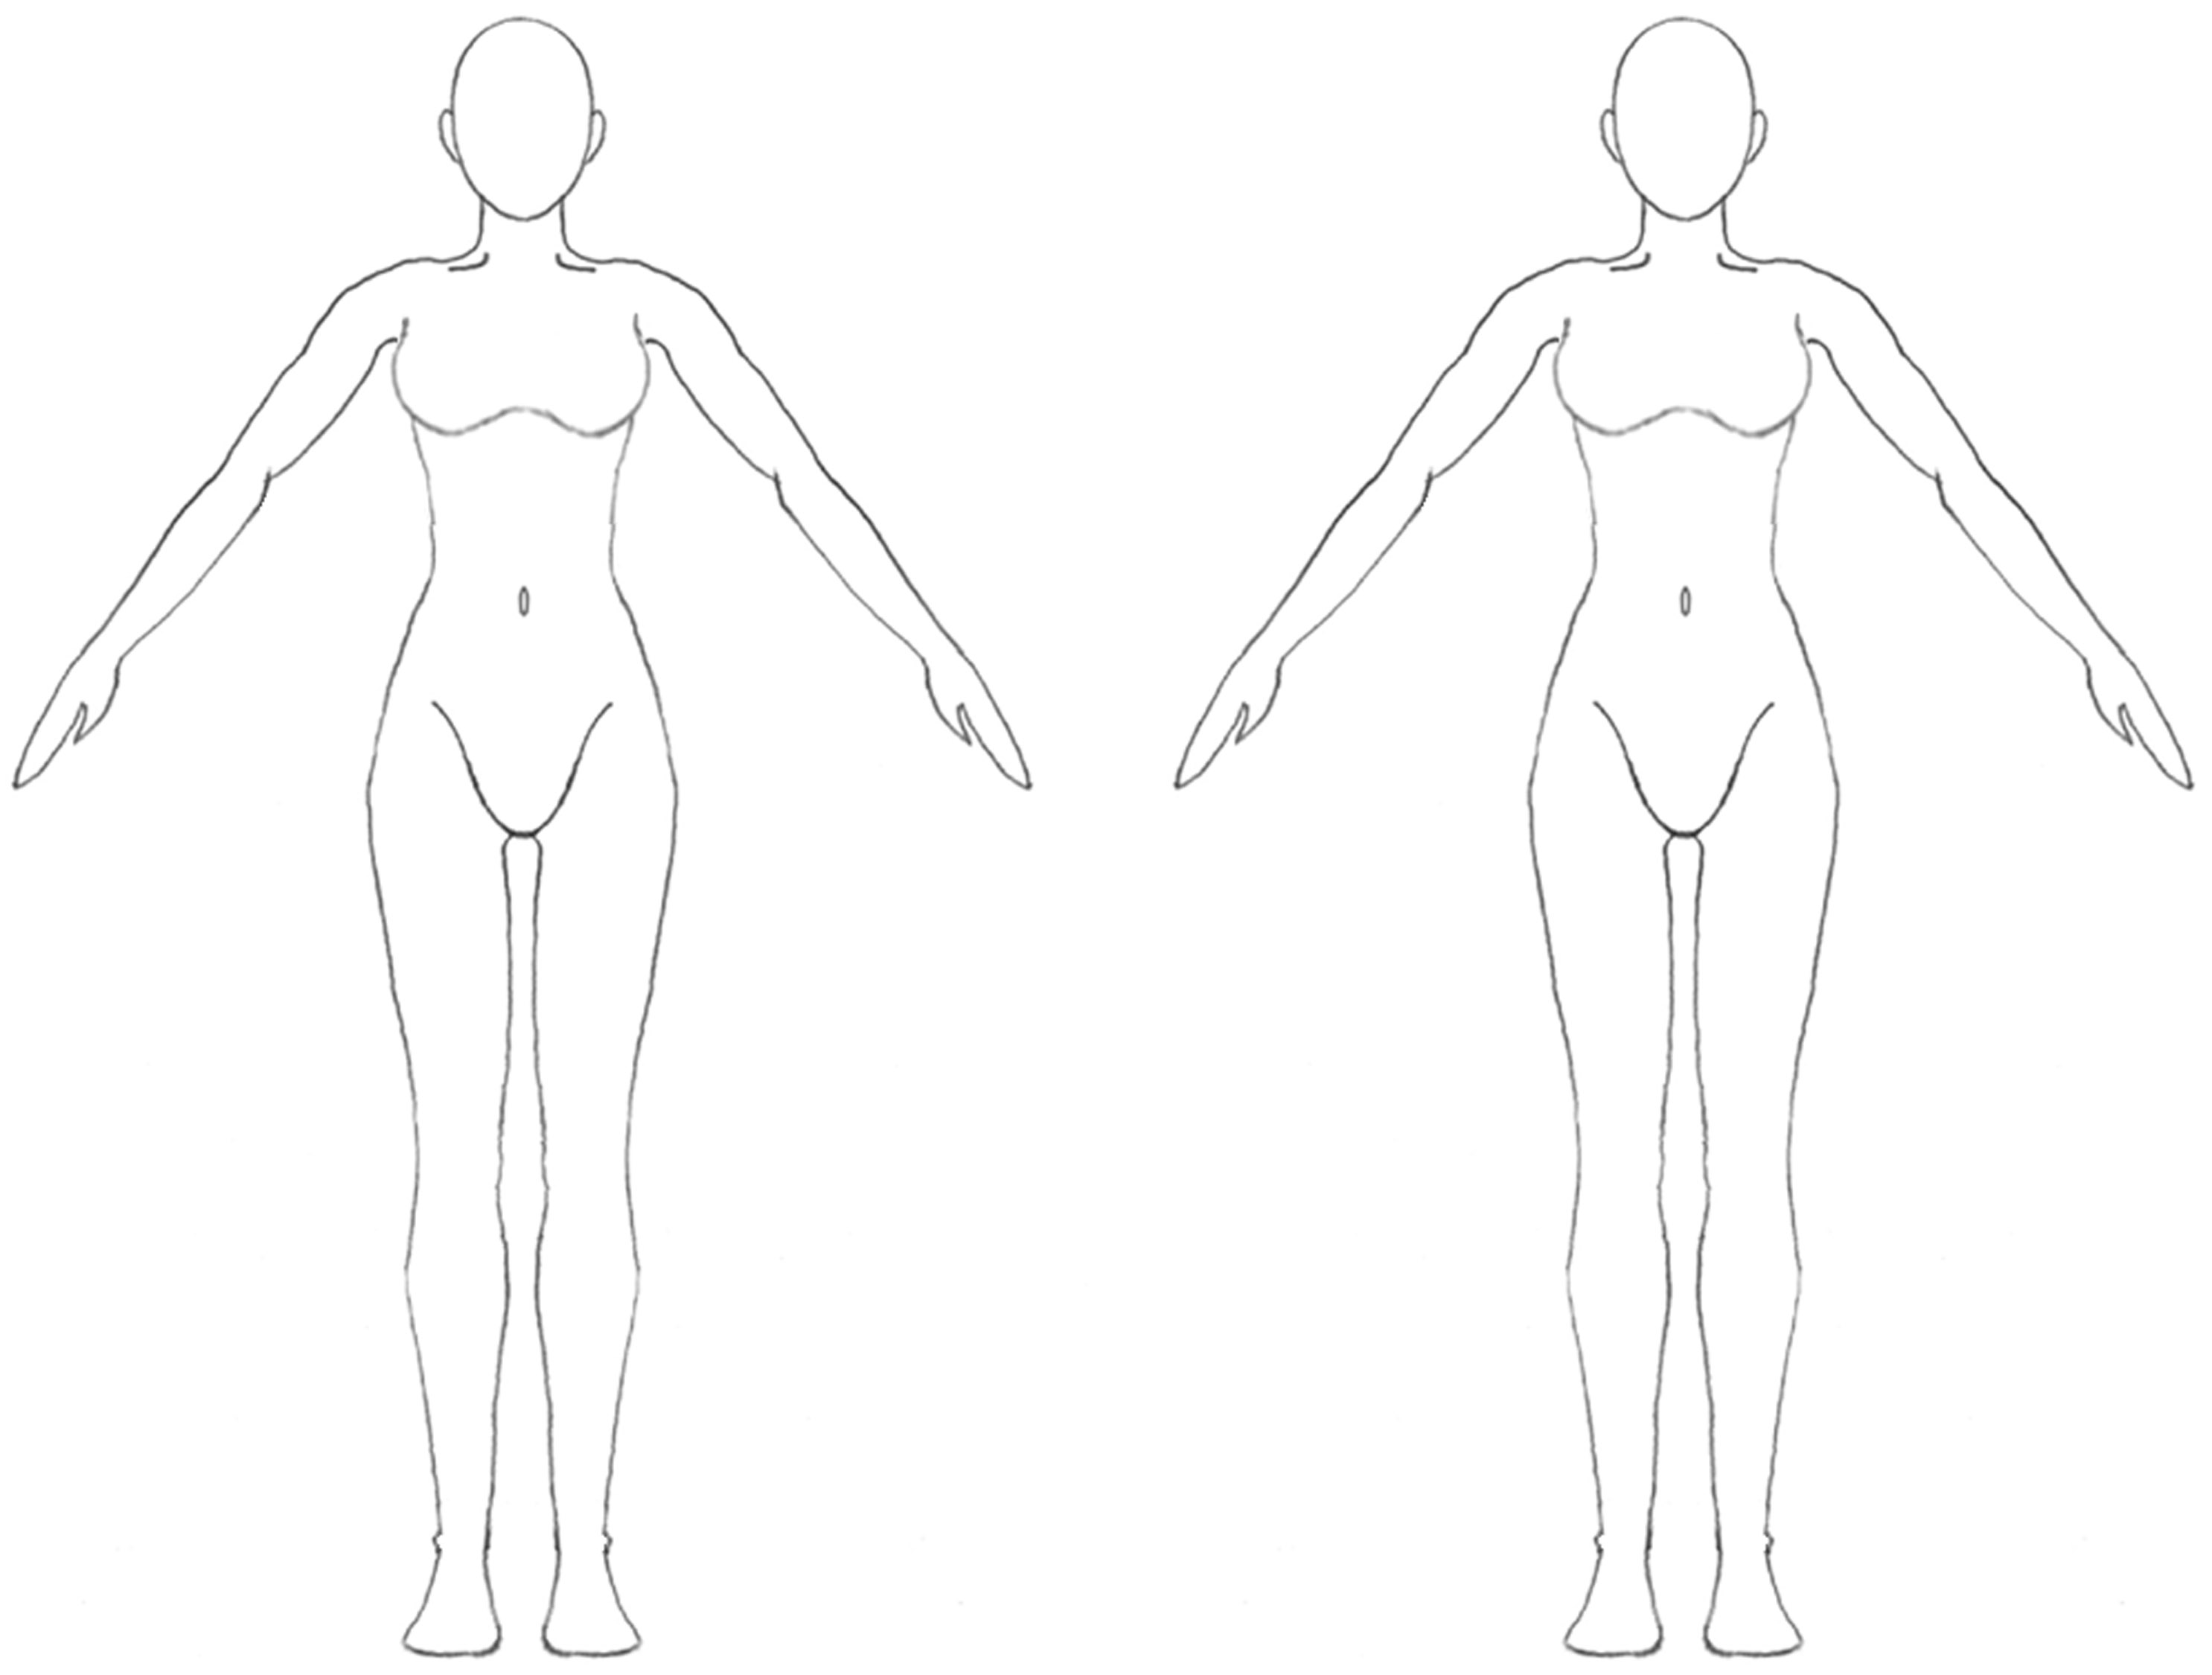 Free Blank Body, Download Free Blank Body png images, Free Within Blank Body Map Template